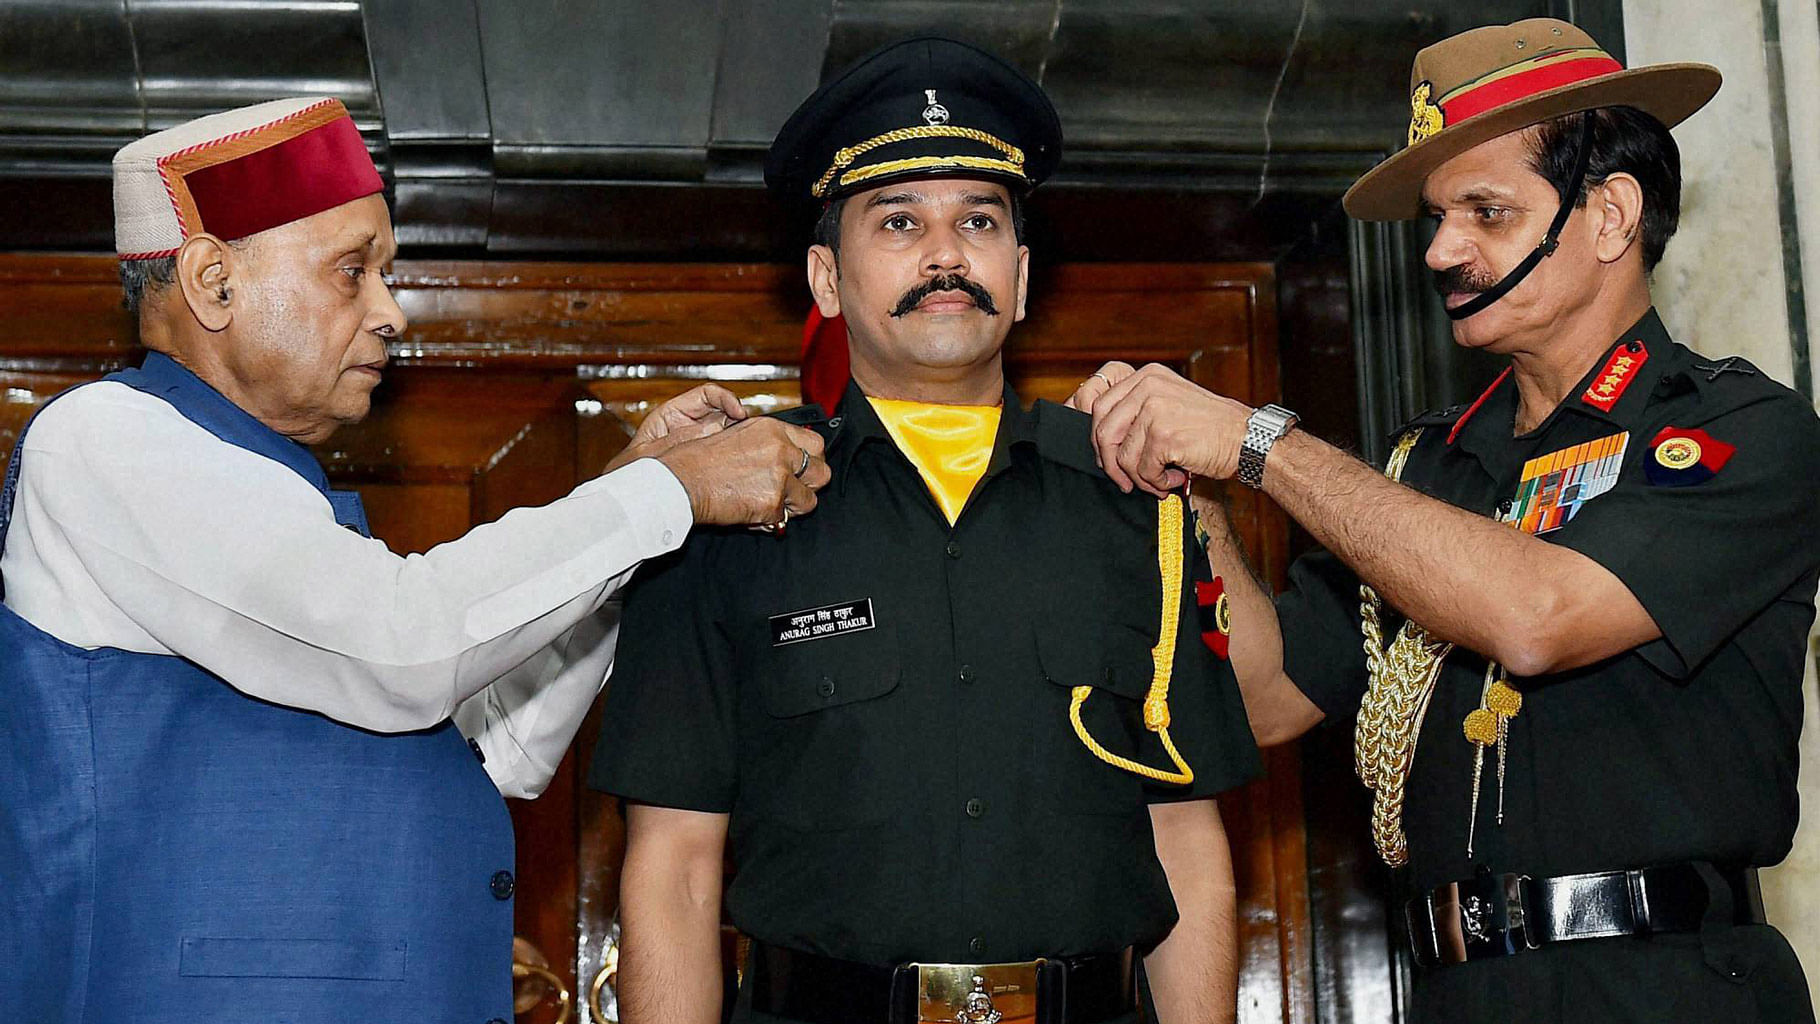 Anurag Thakur being conferred the title of Lieutenant in the Territorial Army. (Photo: PTI)